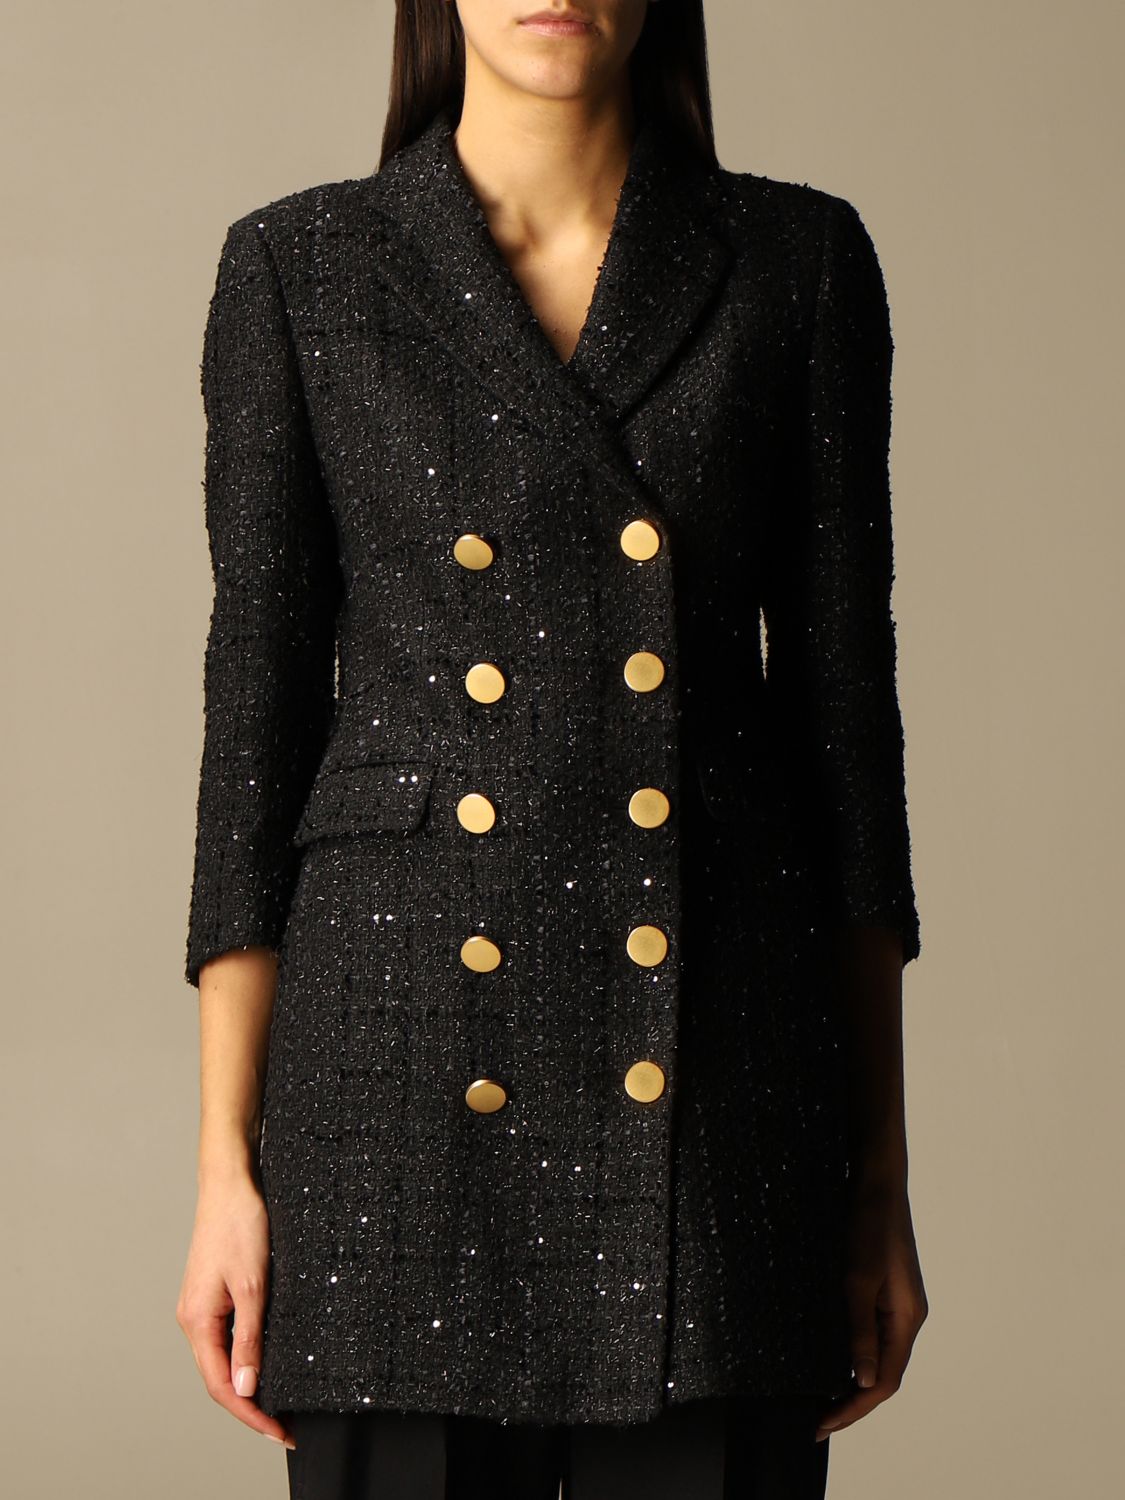 Tagliatore Outlet: double-breasted jacket in bouclé fabric | Coat